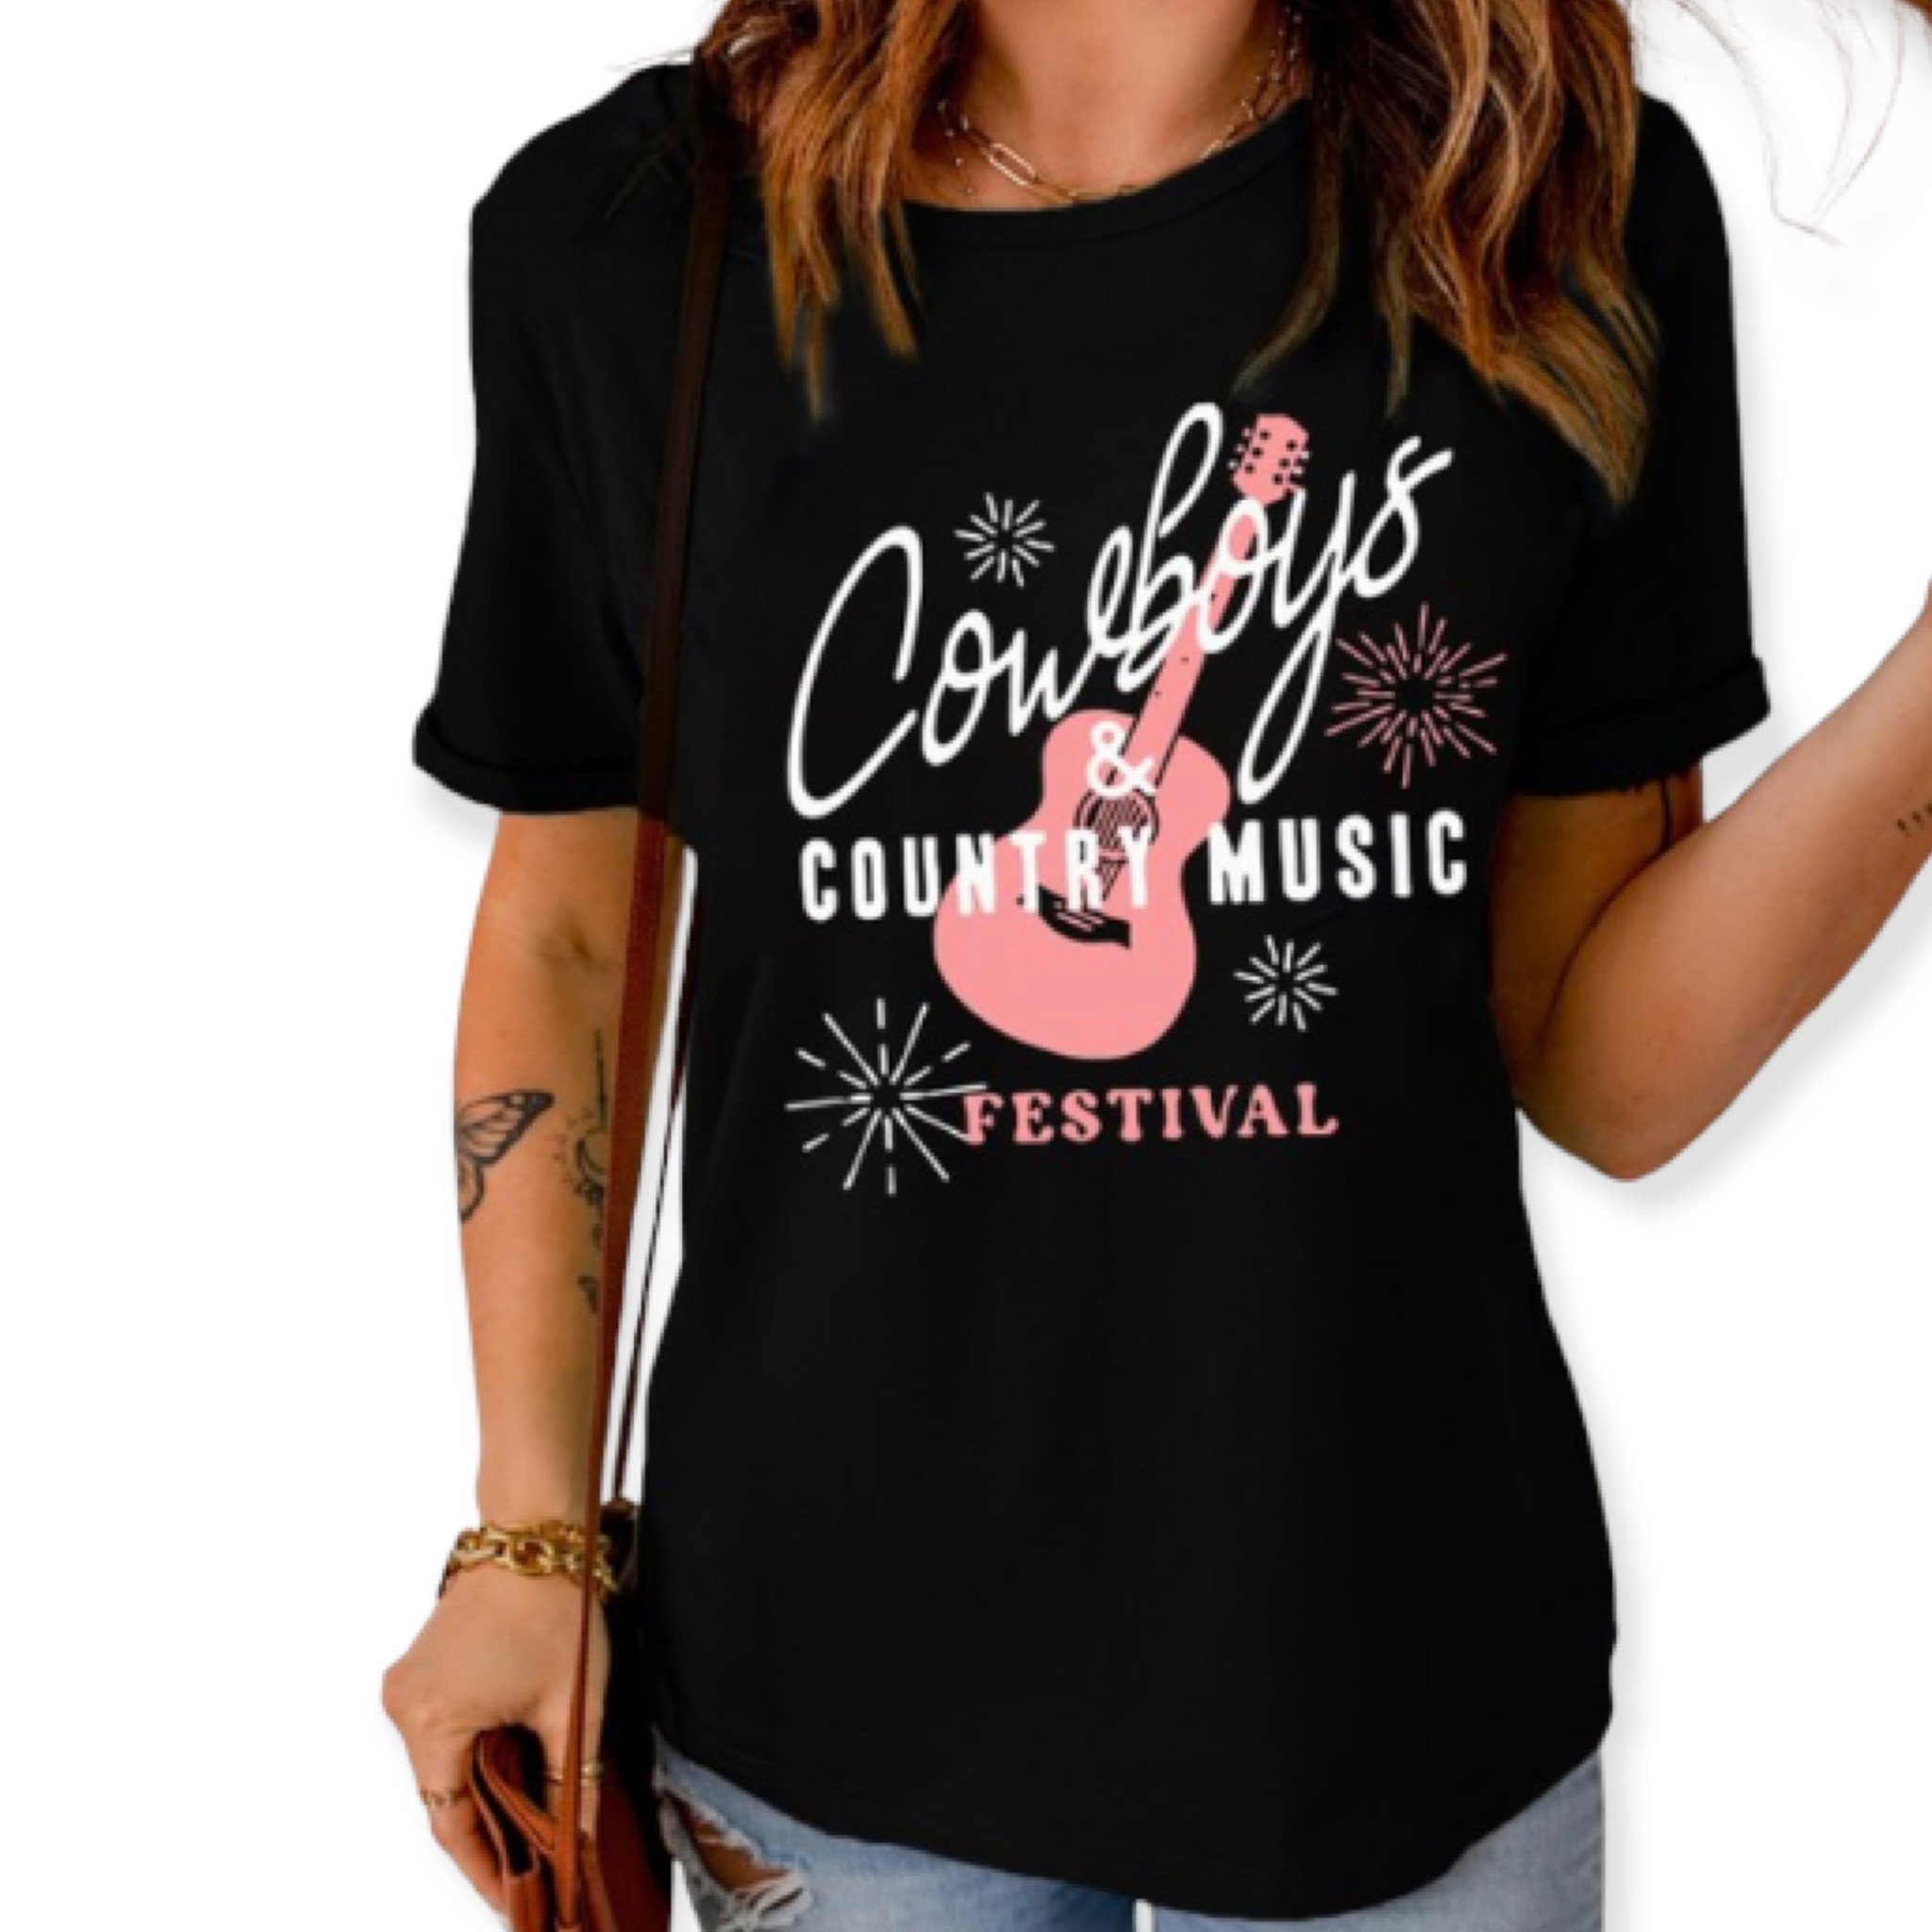 Cowboys and Country Music Graphic Tee - LA Trends Addict